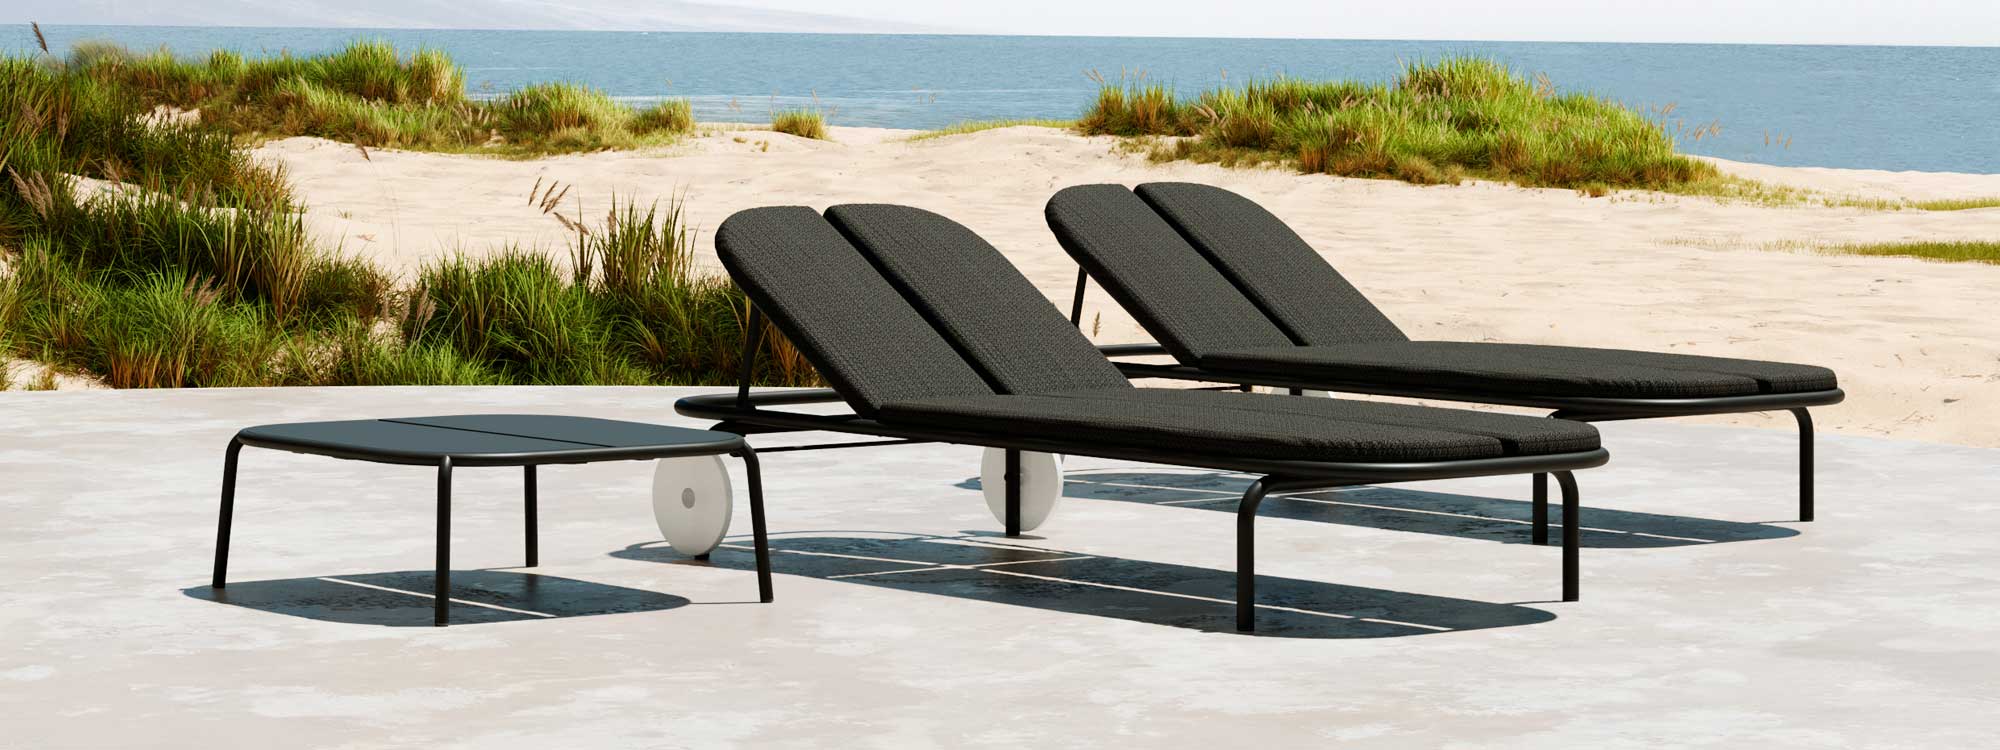 Image of pair of Oiside Parc contemporary tubular aluminium sun loungers and a low table, with sand dunes and sea in the background